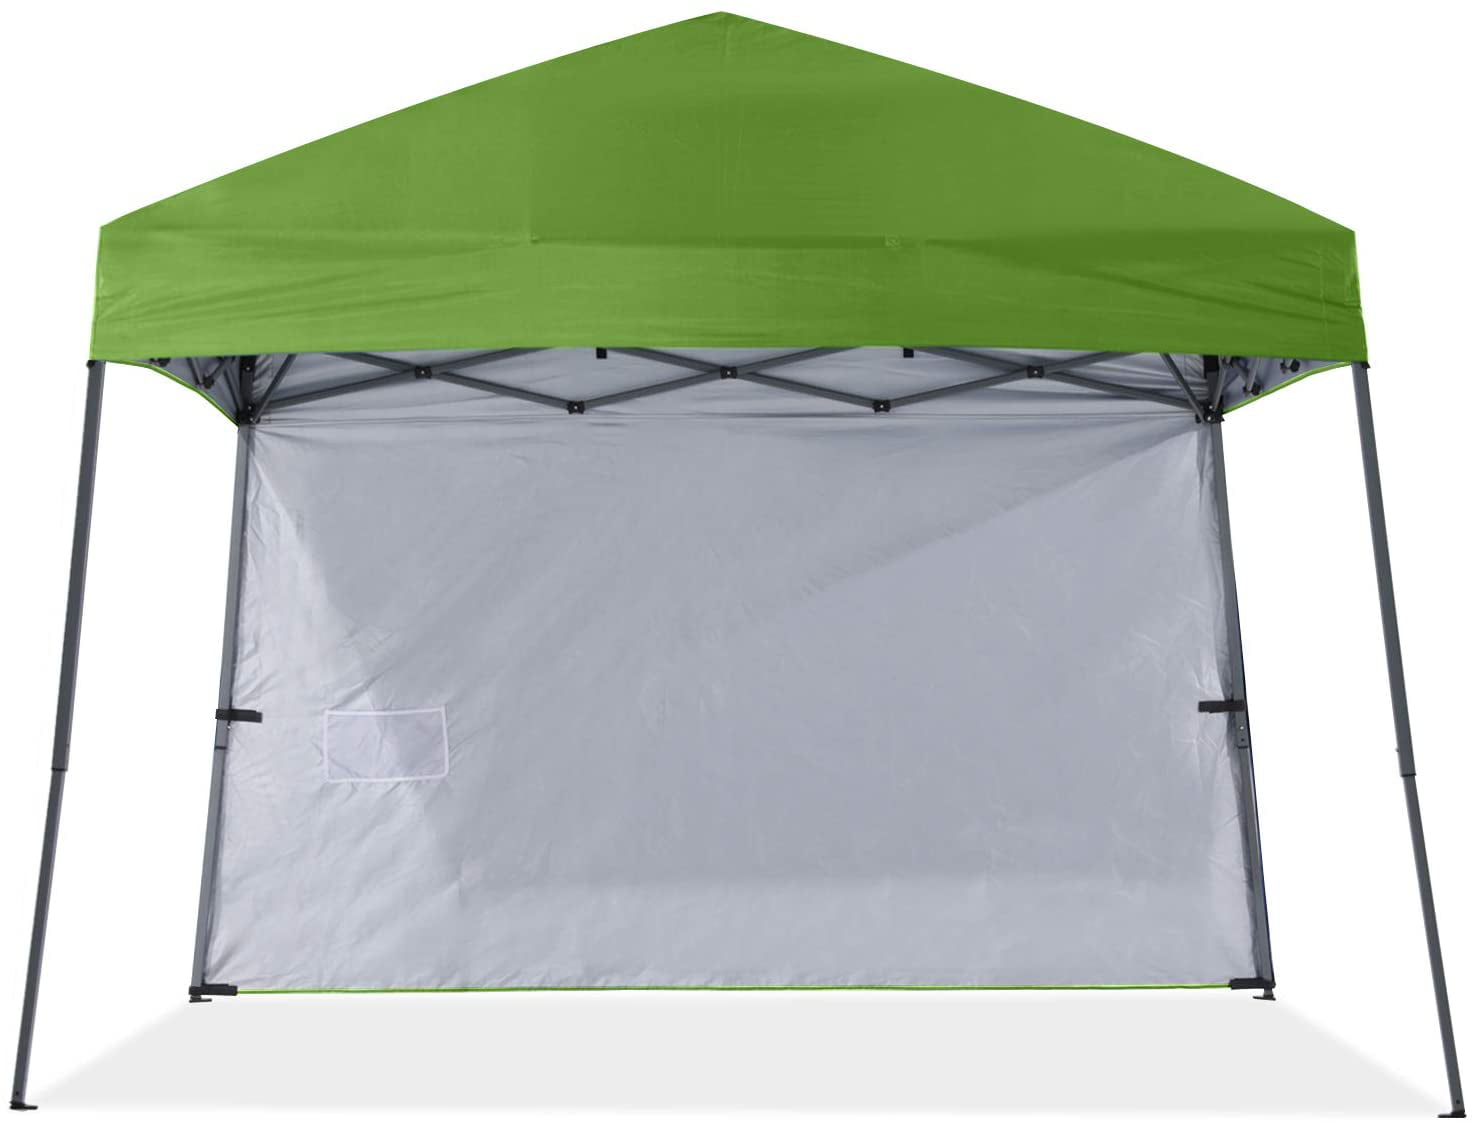 ABCCANOPY 10 ft x 10 ft Outdoor Pop up Slant Leg Canopy Tent with 1 Sun Wall and 1 Backpack Bag - Green